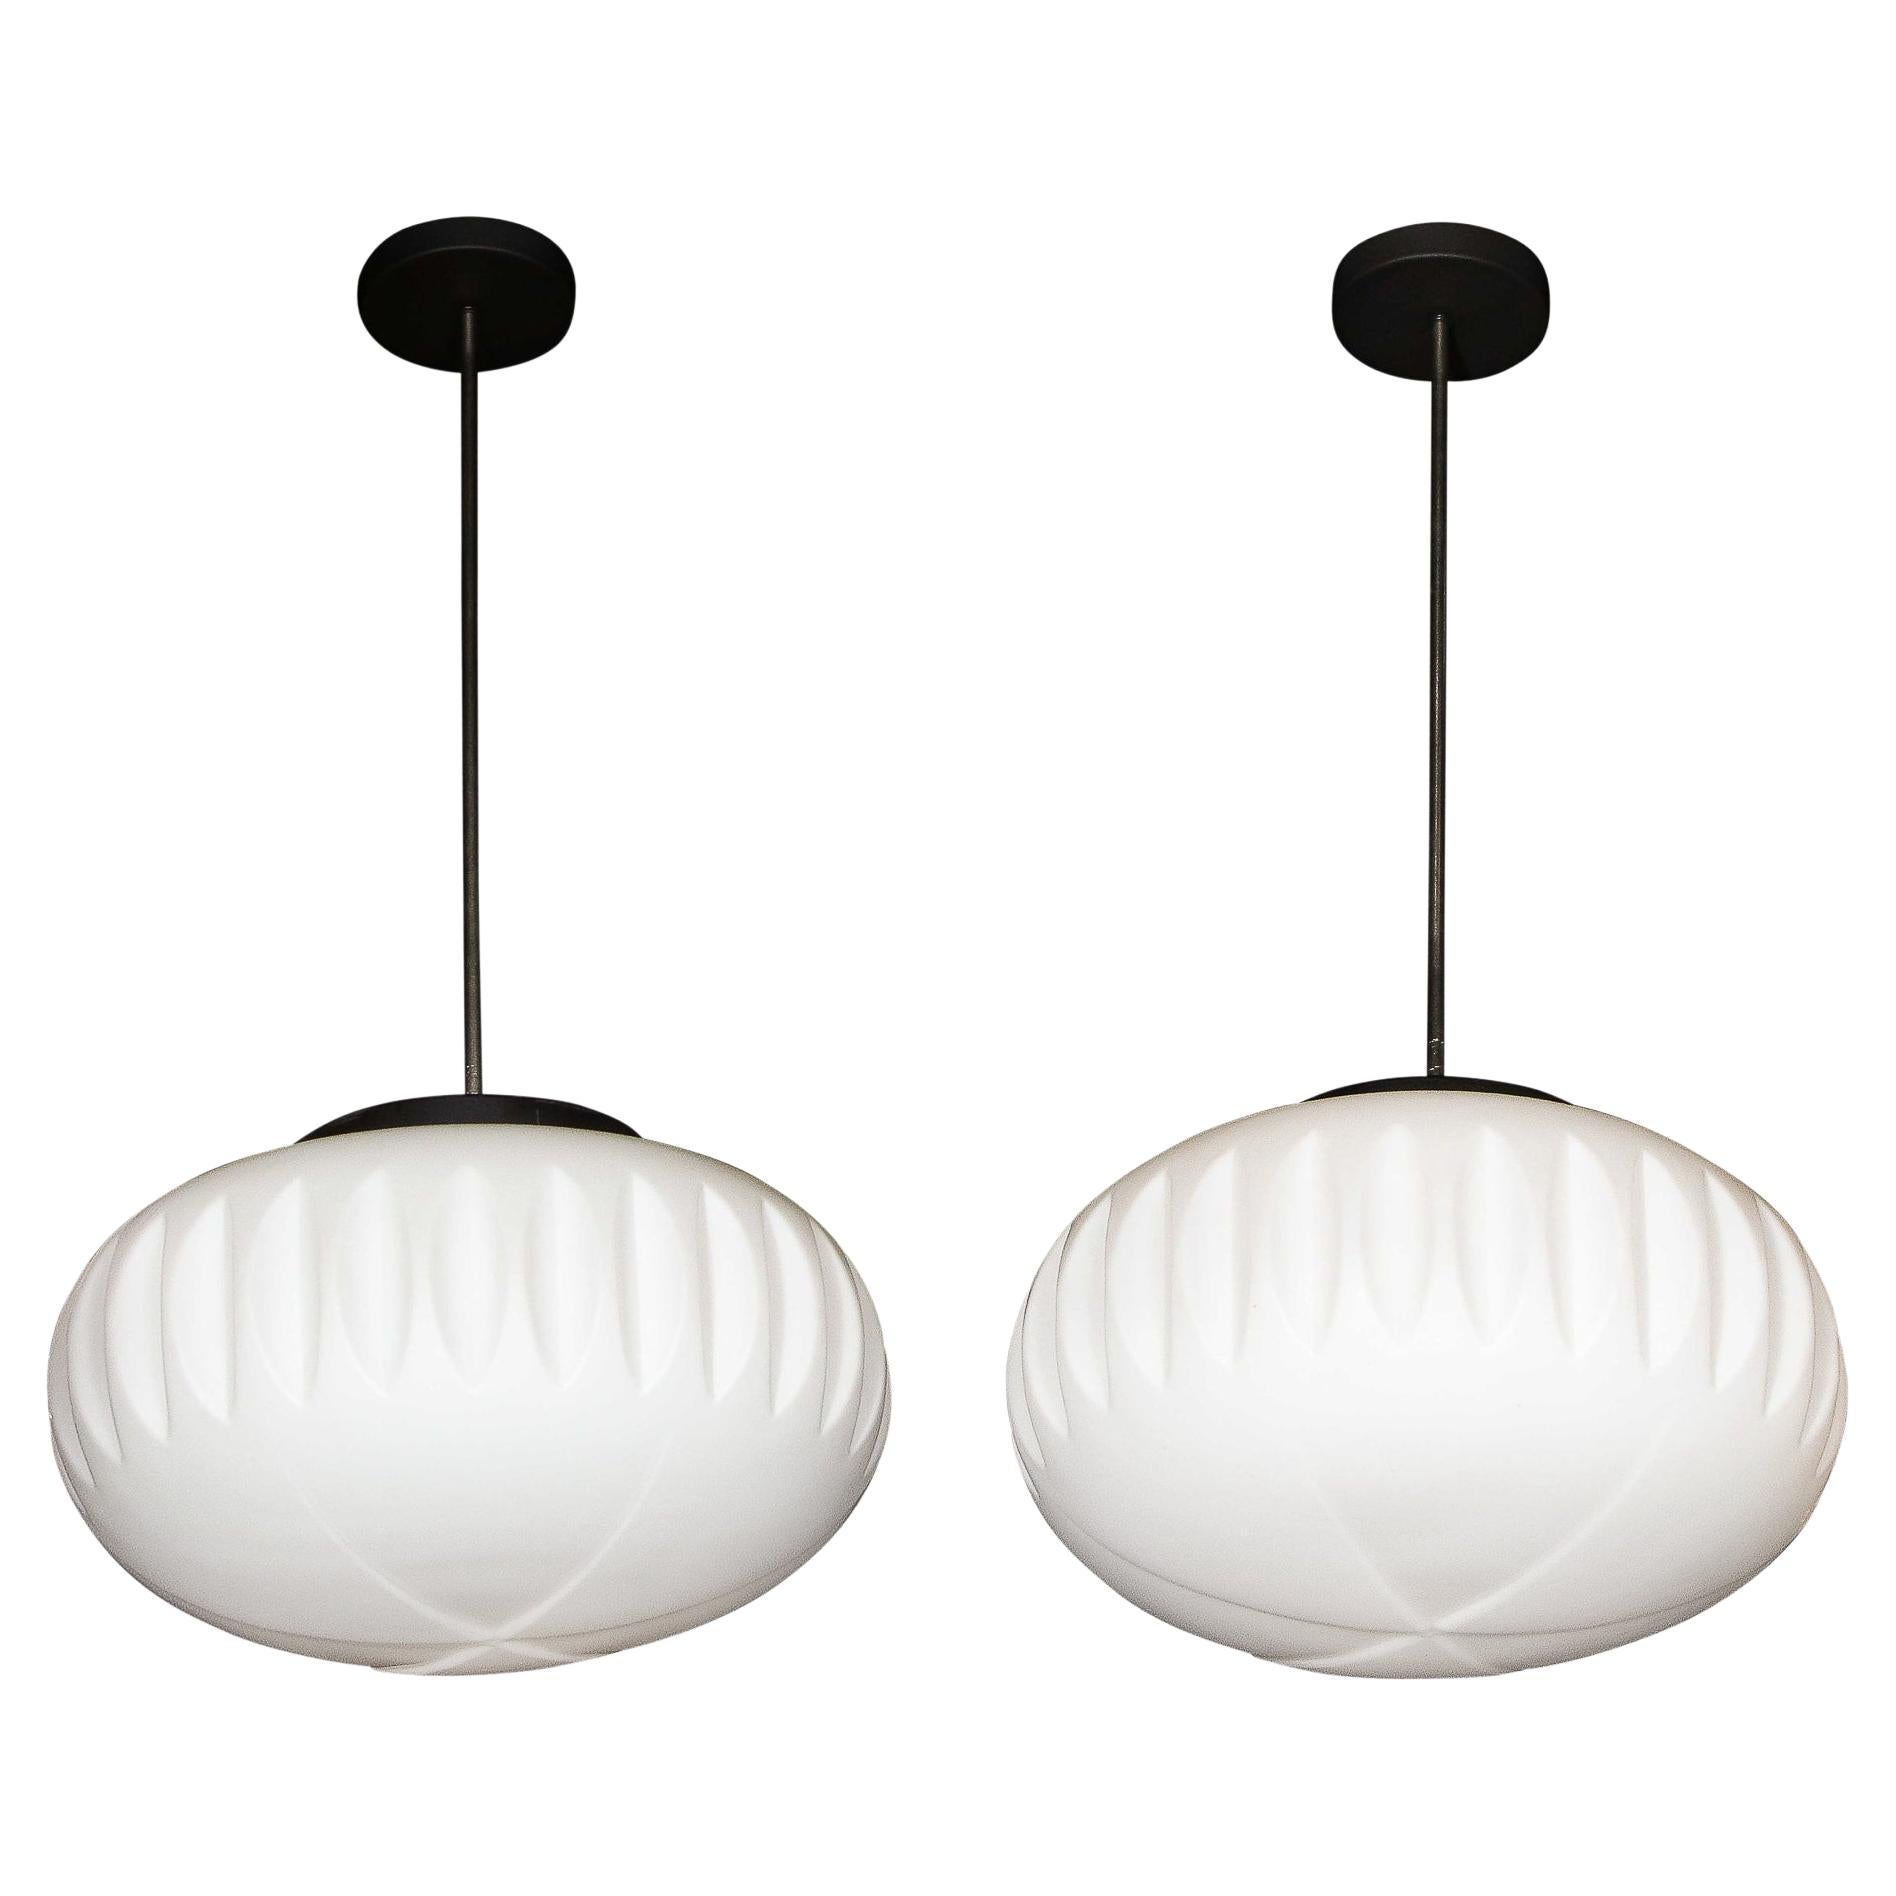 Pair of Mid-Century Modern Chandeliers in Frosted Glass, Black Enamel & Chrome For Sale